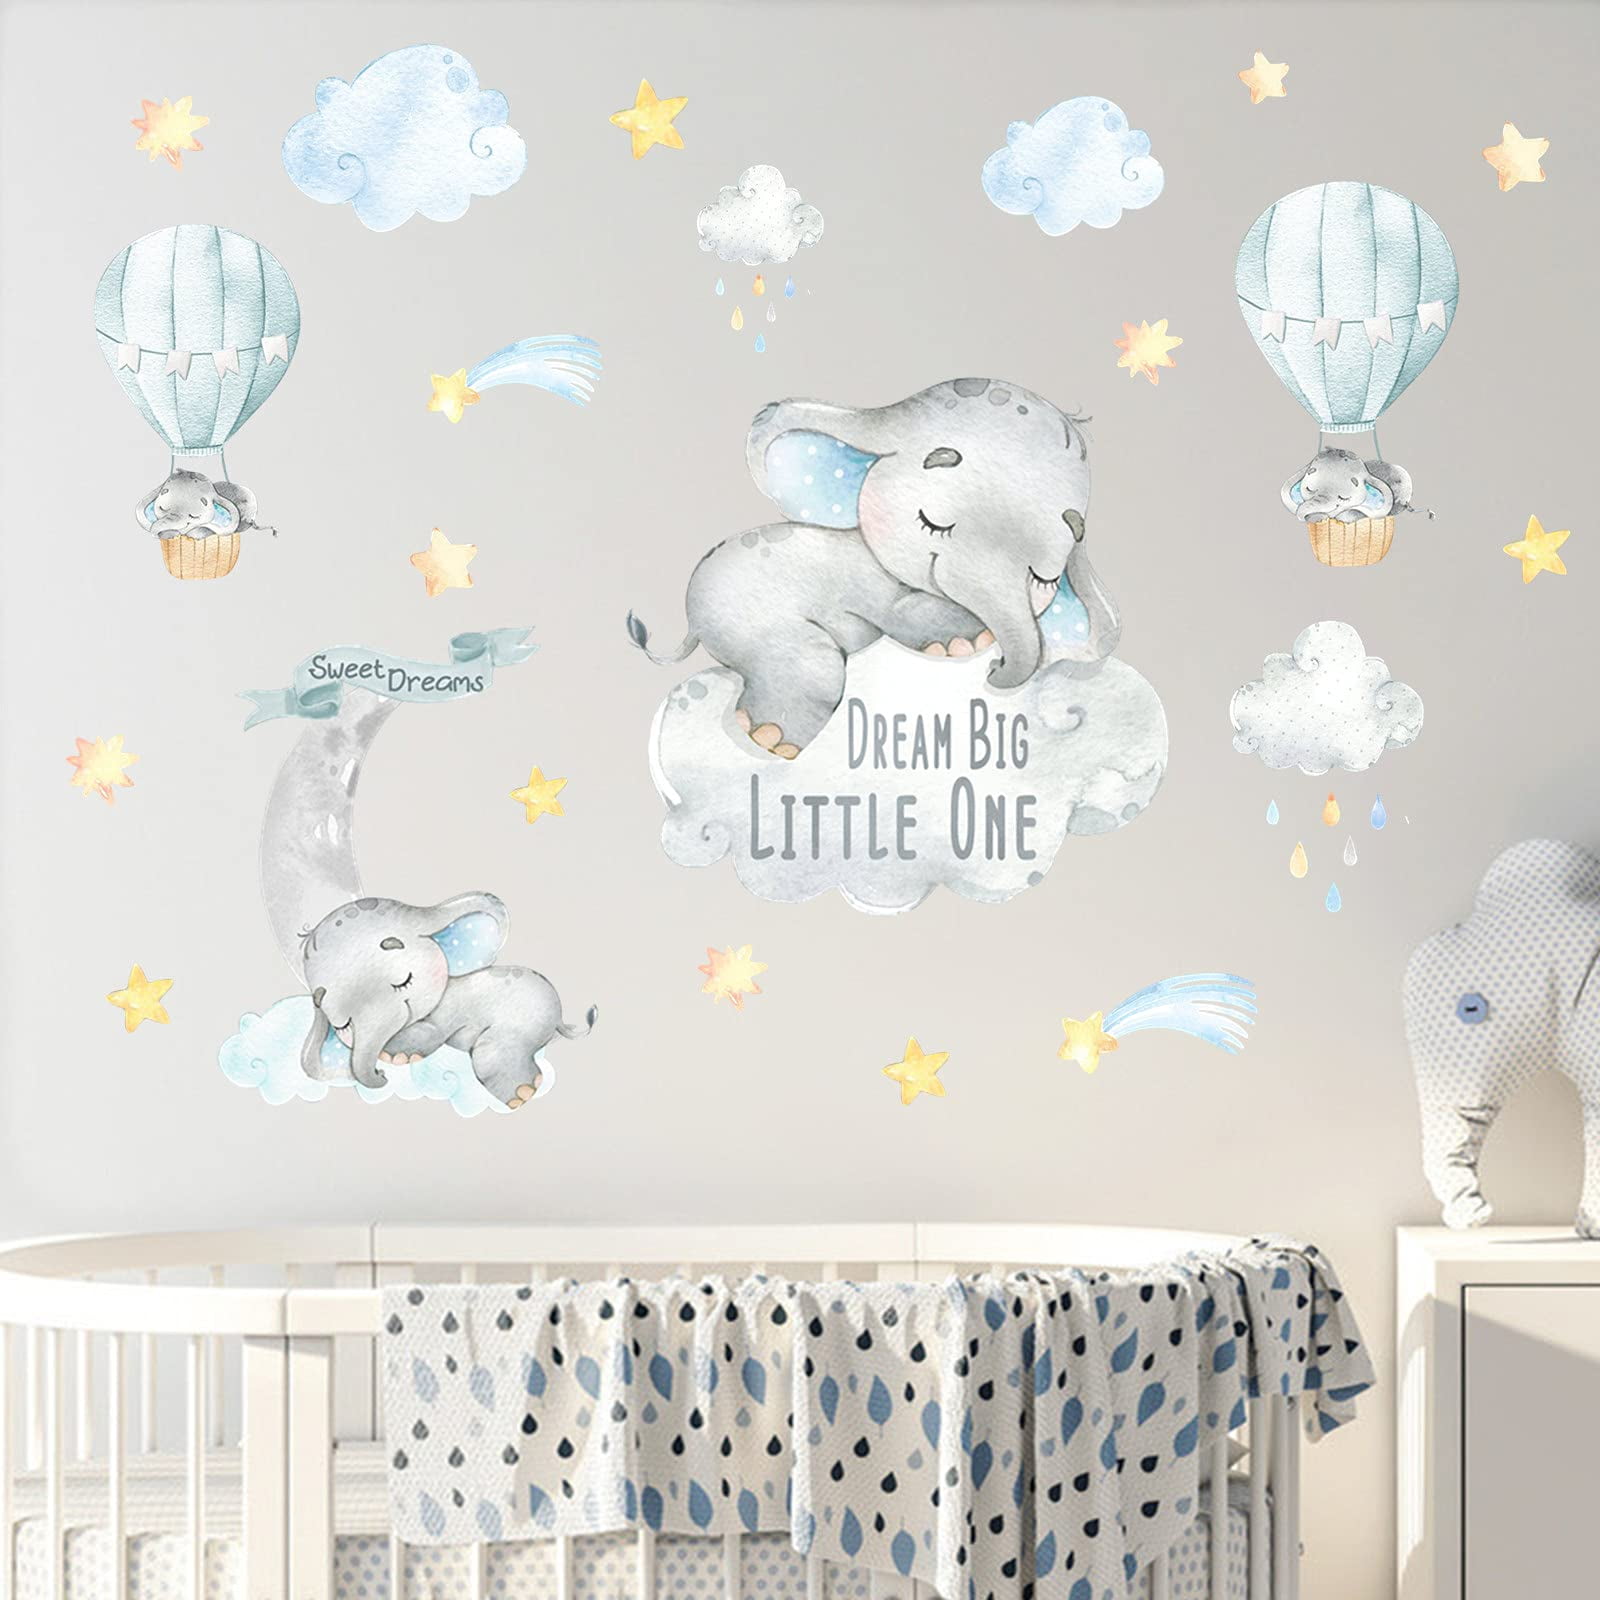 Elephant Wall Stickers Glow in The Dark Elephant Decal Baby Dream Big Little One Boy Nursery Room Wall Decor Quote Wall Stickers Large Watercolor Animal Decal for Kids Girl Bedroom Playroom Wall Decor 